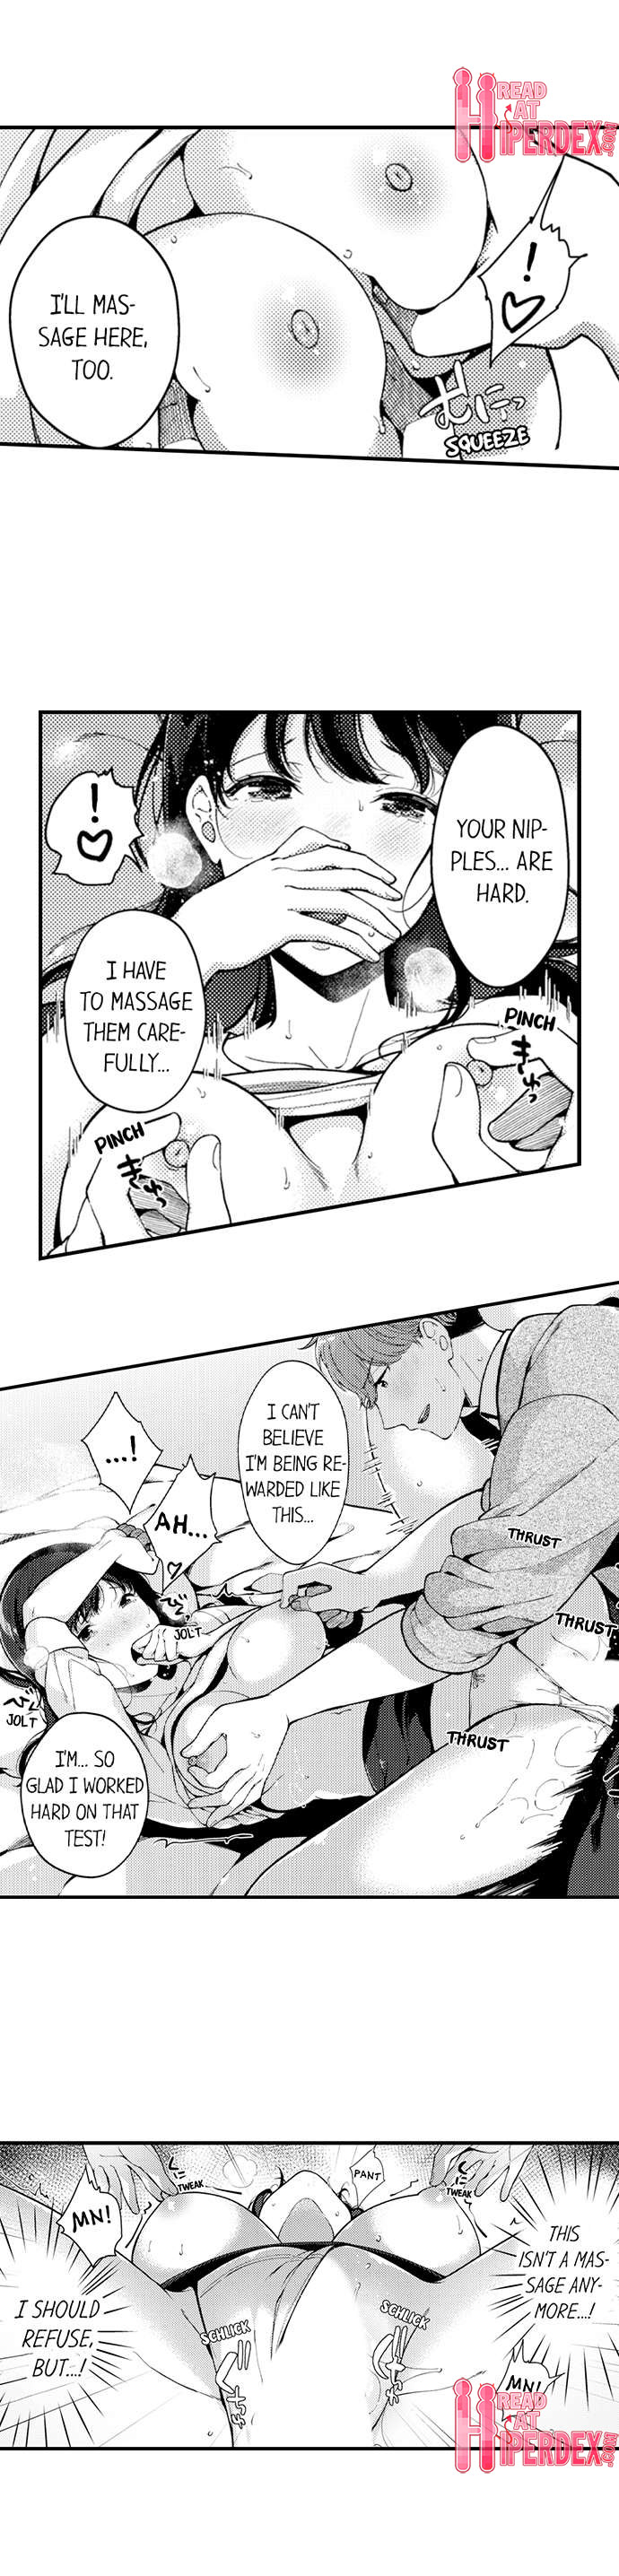 The Massage ♂♀ The Pleasure of Full Course Sex - Chapter 6 Page 8